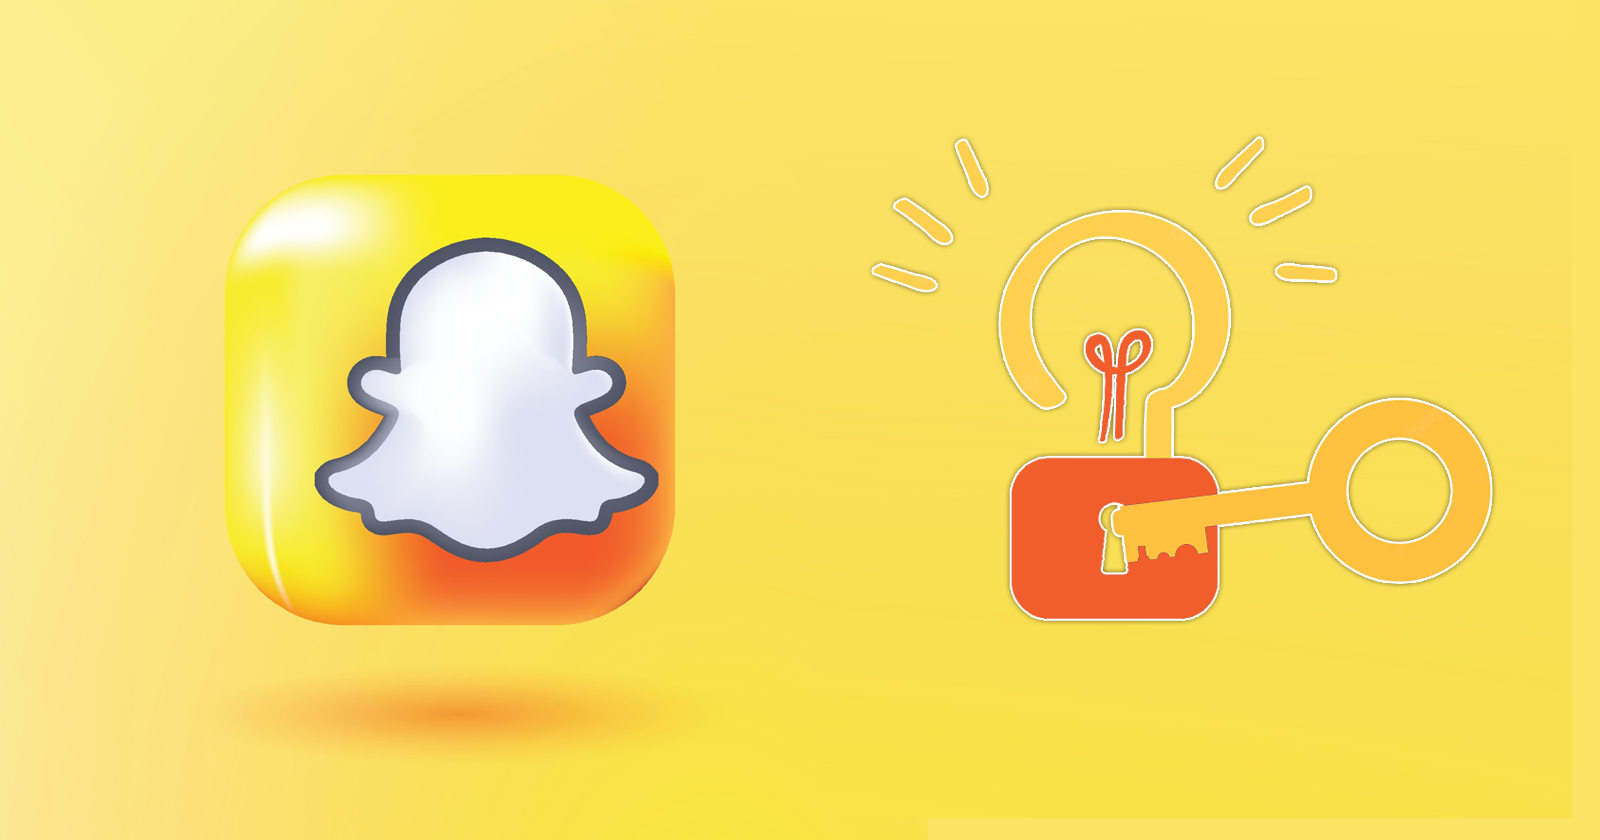 How to Unlock Snapchat Account in Simple Steps